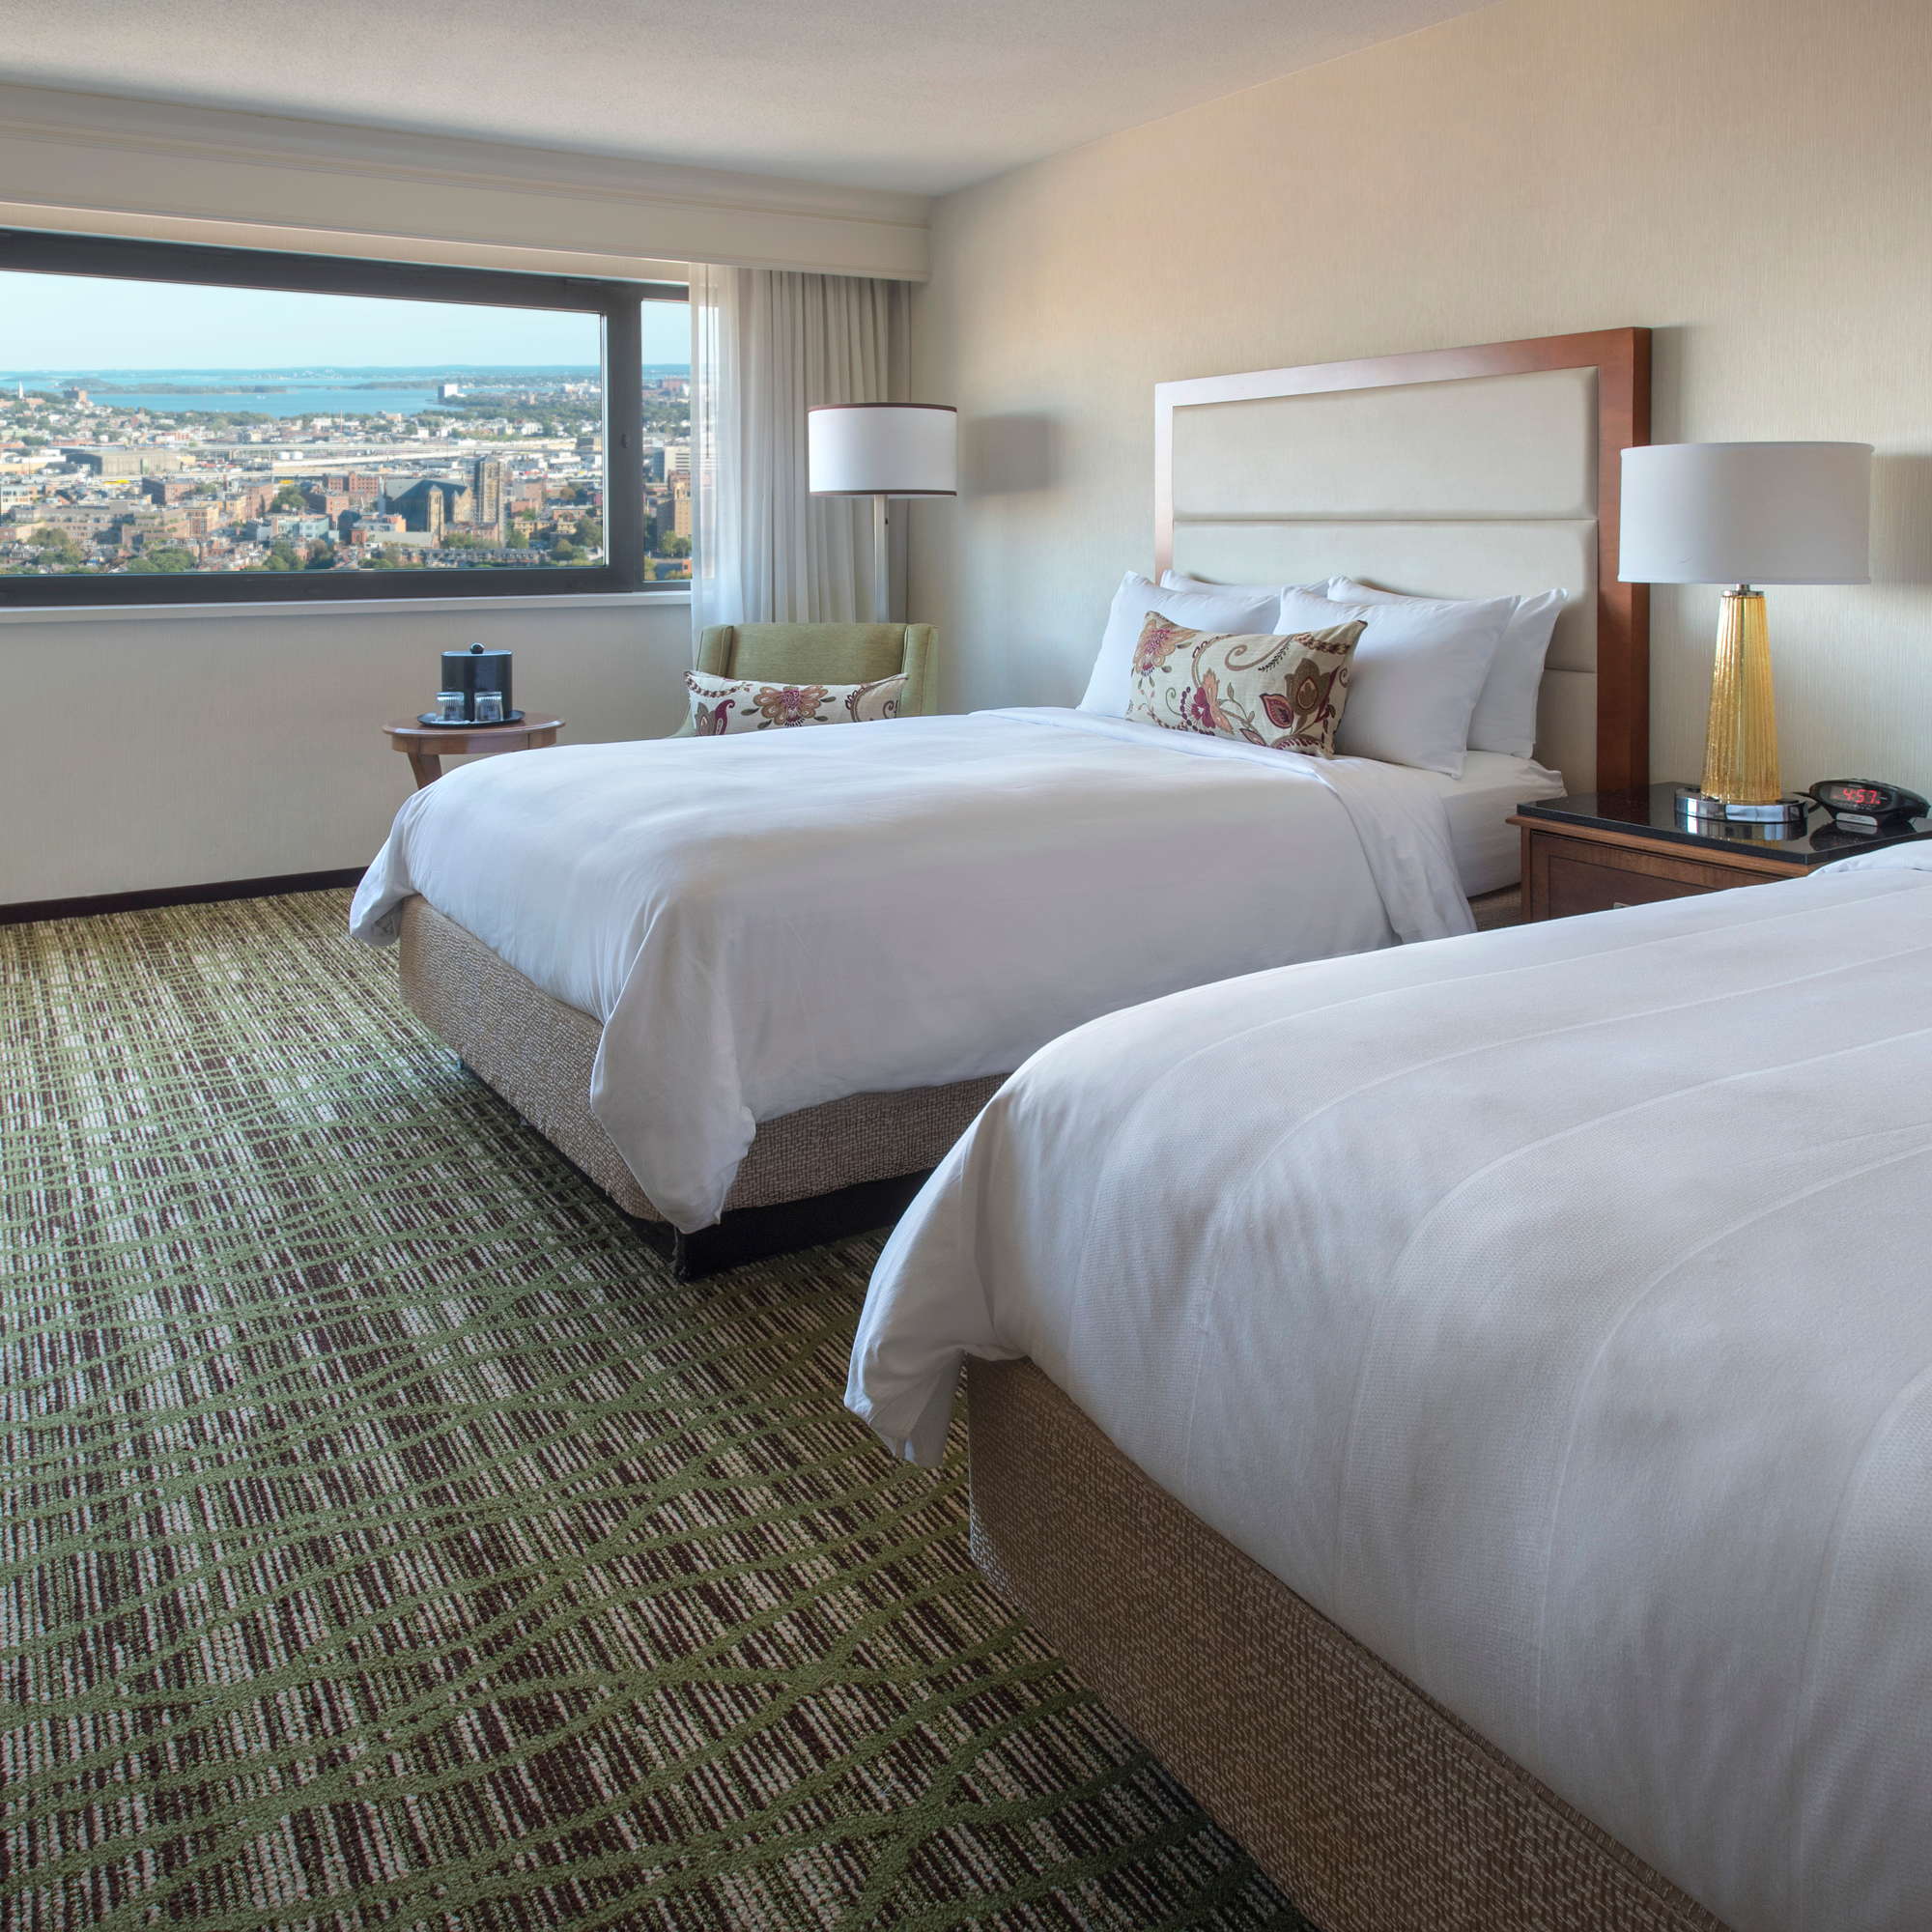 Boston Marriott Copley Place Review: What To REALLY Expect If You Stay